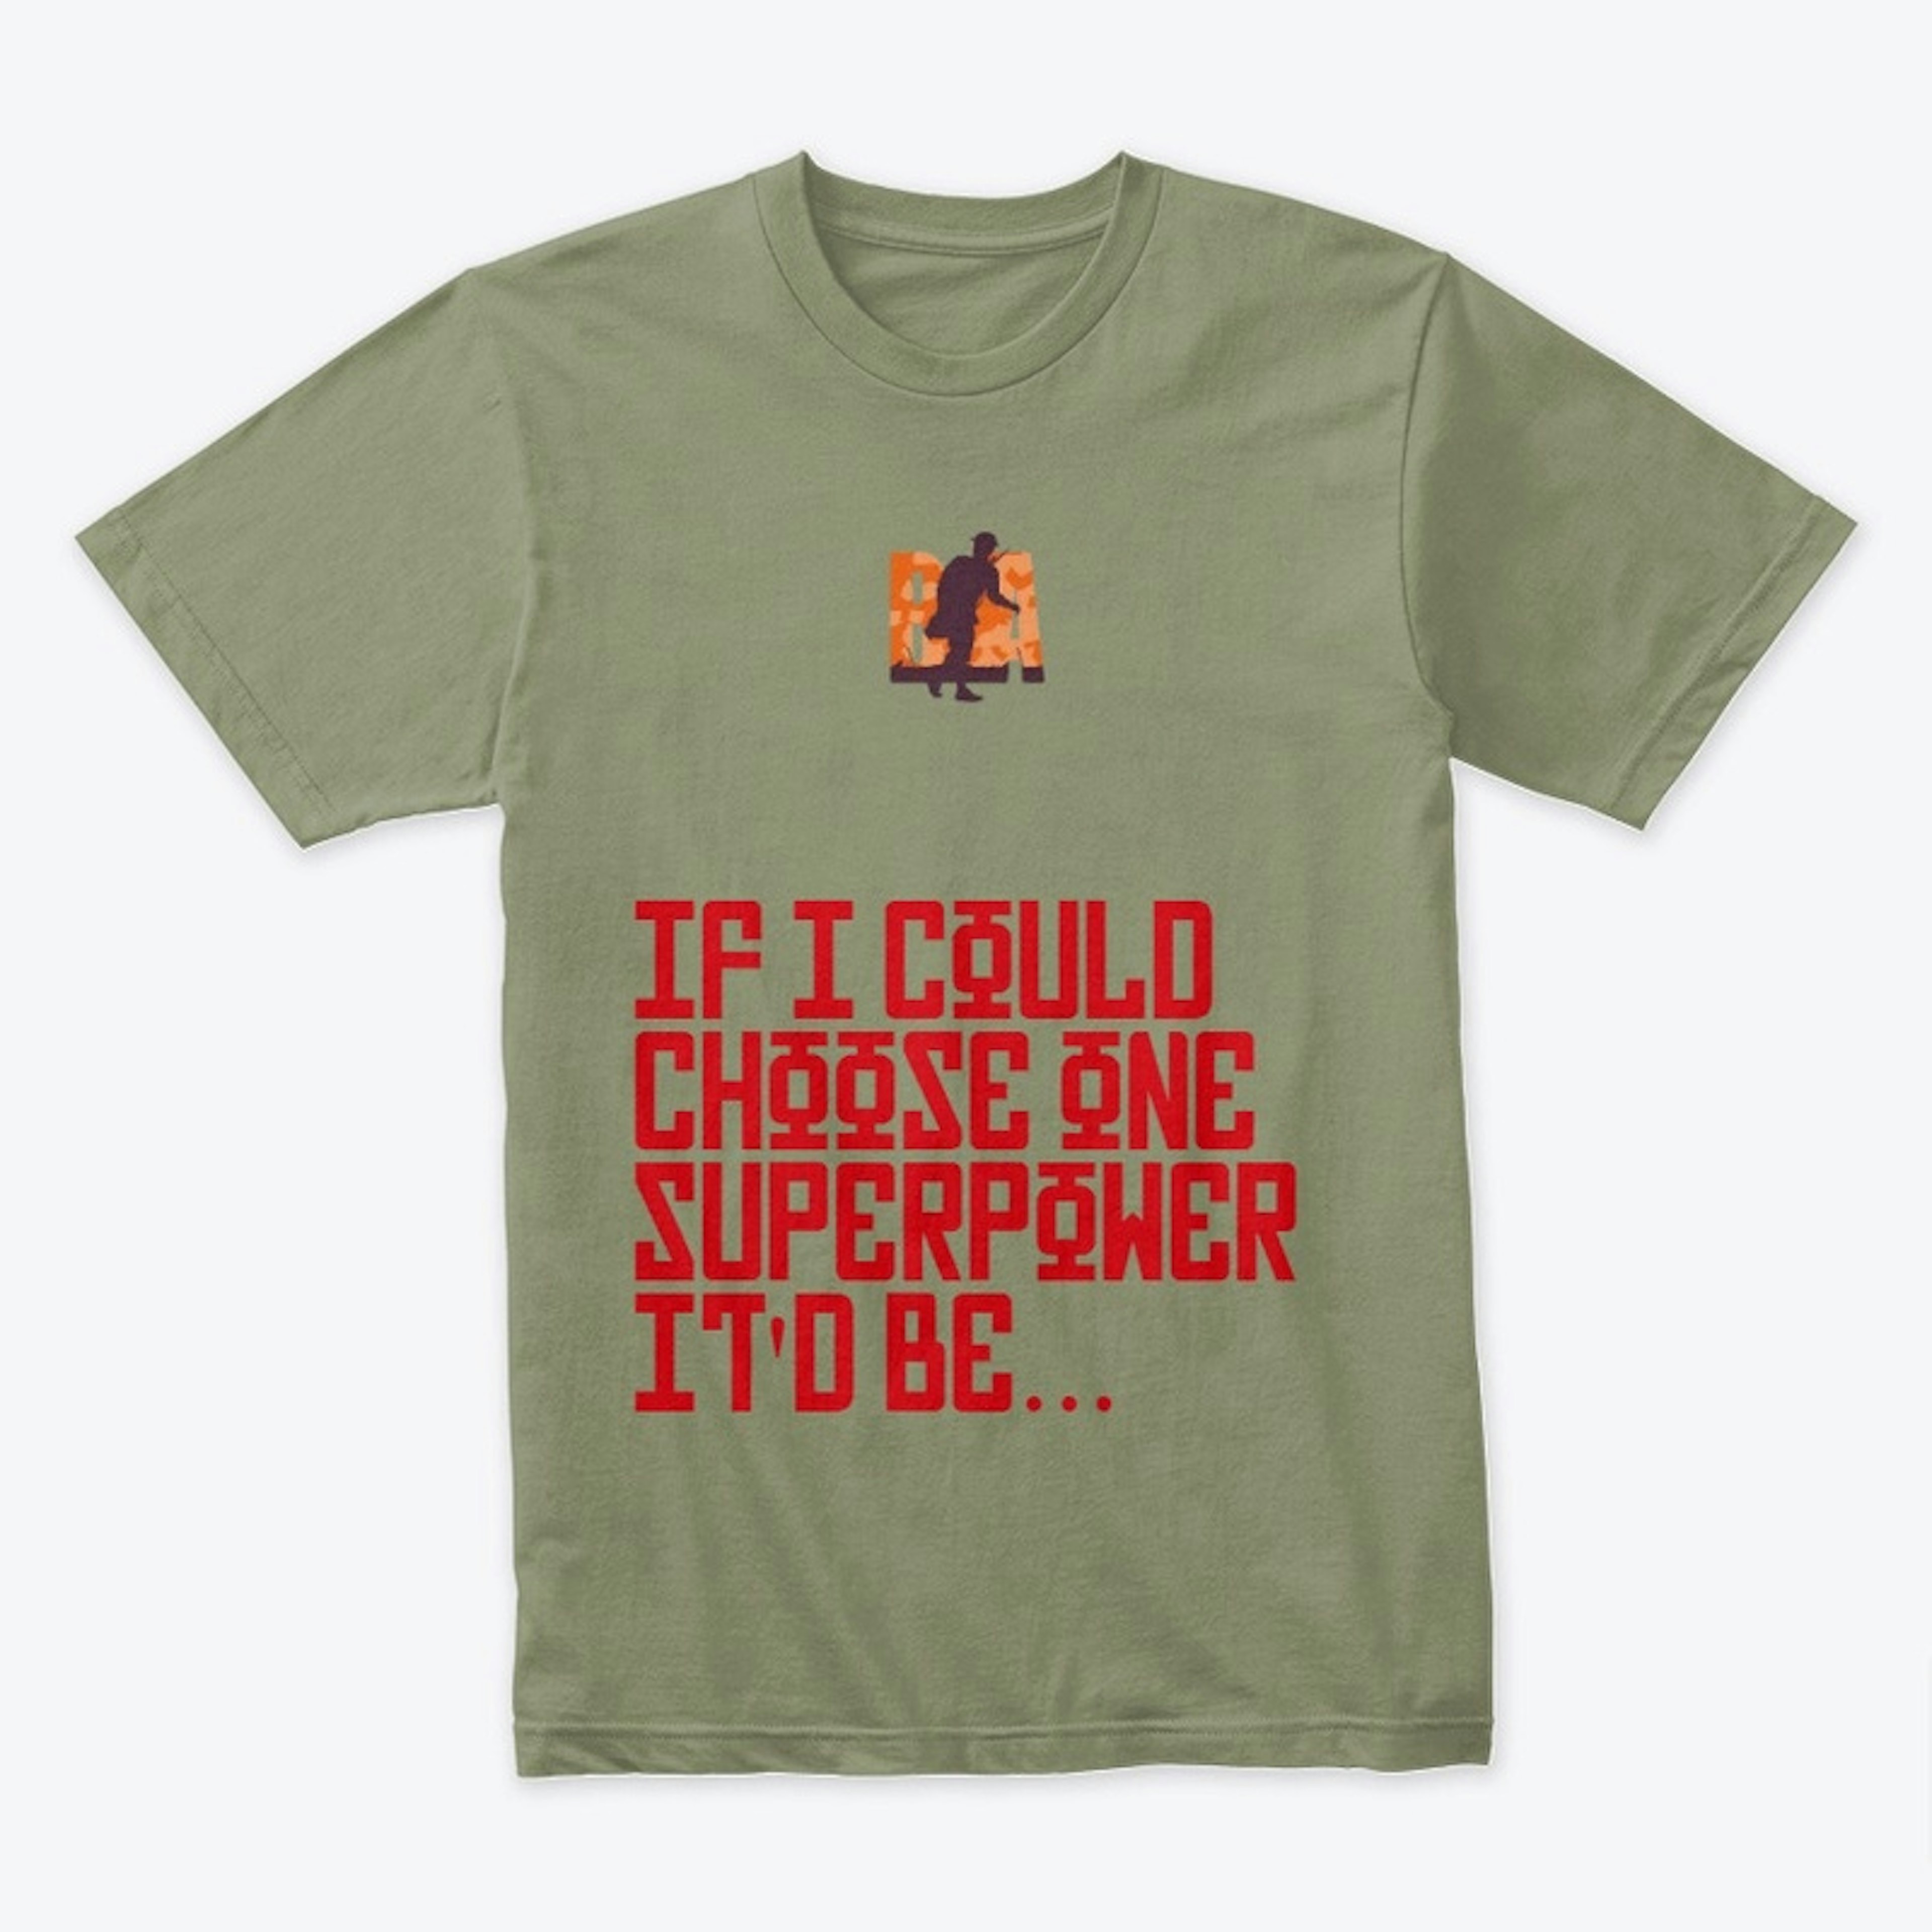 If I could choose one superpower... 